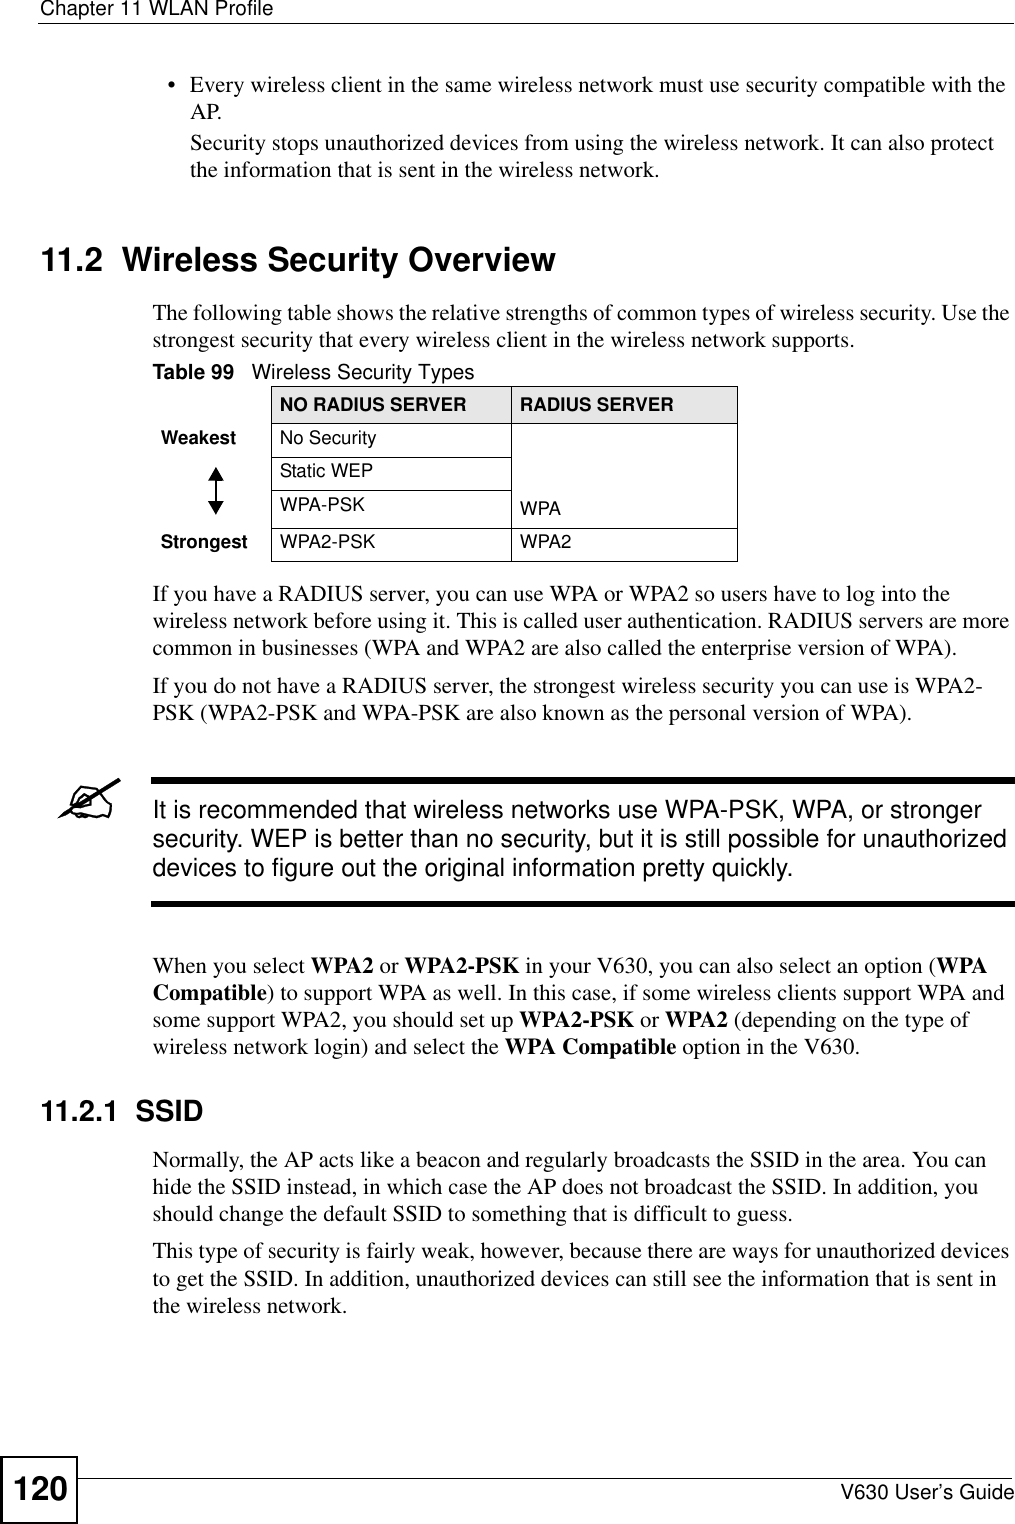 Chapter 11 WLAN ProfileV630 User’s Guide120• Every wireless client in the same wireless network must use security compatible with the AP.Security stops unauthorized devices from using the wireless network. It can also protect the information that is sent in the wireless network.11.2  Wireless Security OverviewThe following table shows the relative strengths of common types of wireless security. Use the strongest security that every wireless client in the wireless network supports. If you have a RADIUS server, you can use WPA or WPA2 so users have to log into the wireless network before using it. This is called user authentication. RADIUS servers are more common in businesses (WPA and WPA2 are also called the enterprise version of WPA).If you do not have a RADIUS server, the strongest wireless security you can use is WPA2-PSK (WPA2-PSK and WPA-PSK are also known as the personal version of WPA).&quot;It is recommended that wireless networks use WPA-PSK, WPA, or stronger security. WEP is better than no security, but it is still possible for unauthorized devices to figure out the original information pretty quickly.When you select WPA2 or WPA2-PSK in your V630, you can also select an option (WPA Compatible) to support WPA as well. In this case, if some wireless clients support WPA and some support WPA2, you should set up WPA2-PSK or WPA2 (depending on the type of wireless network login) and select the WPA Compatible option in the V630.11.2.1  SSIDNormally, the AP acts like a beacon and regularly broadcasts the SSID in the area. You can hide the SSID instead, in which case the AP does not broadcast the SSID. In addition, you should change the default SSID to something that is difficult to guess.This type of security is fairly weak, however, because there are ways for unauthorized devices to get the SSID. In addition, unauthorized devices can still see the information that is sent in the wireless network.Table 99   Wireless Security TypesNO RADIUS SERVER RADIUS SERVERWeakest No SecurityWPAStatic WEPWPA-PSKStrongest WPA2-PSK WPA2